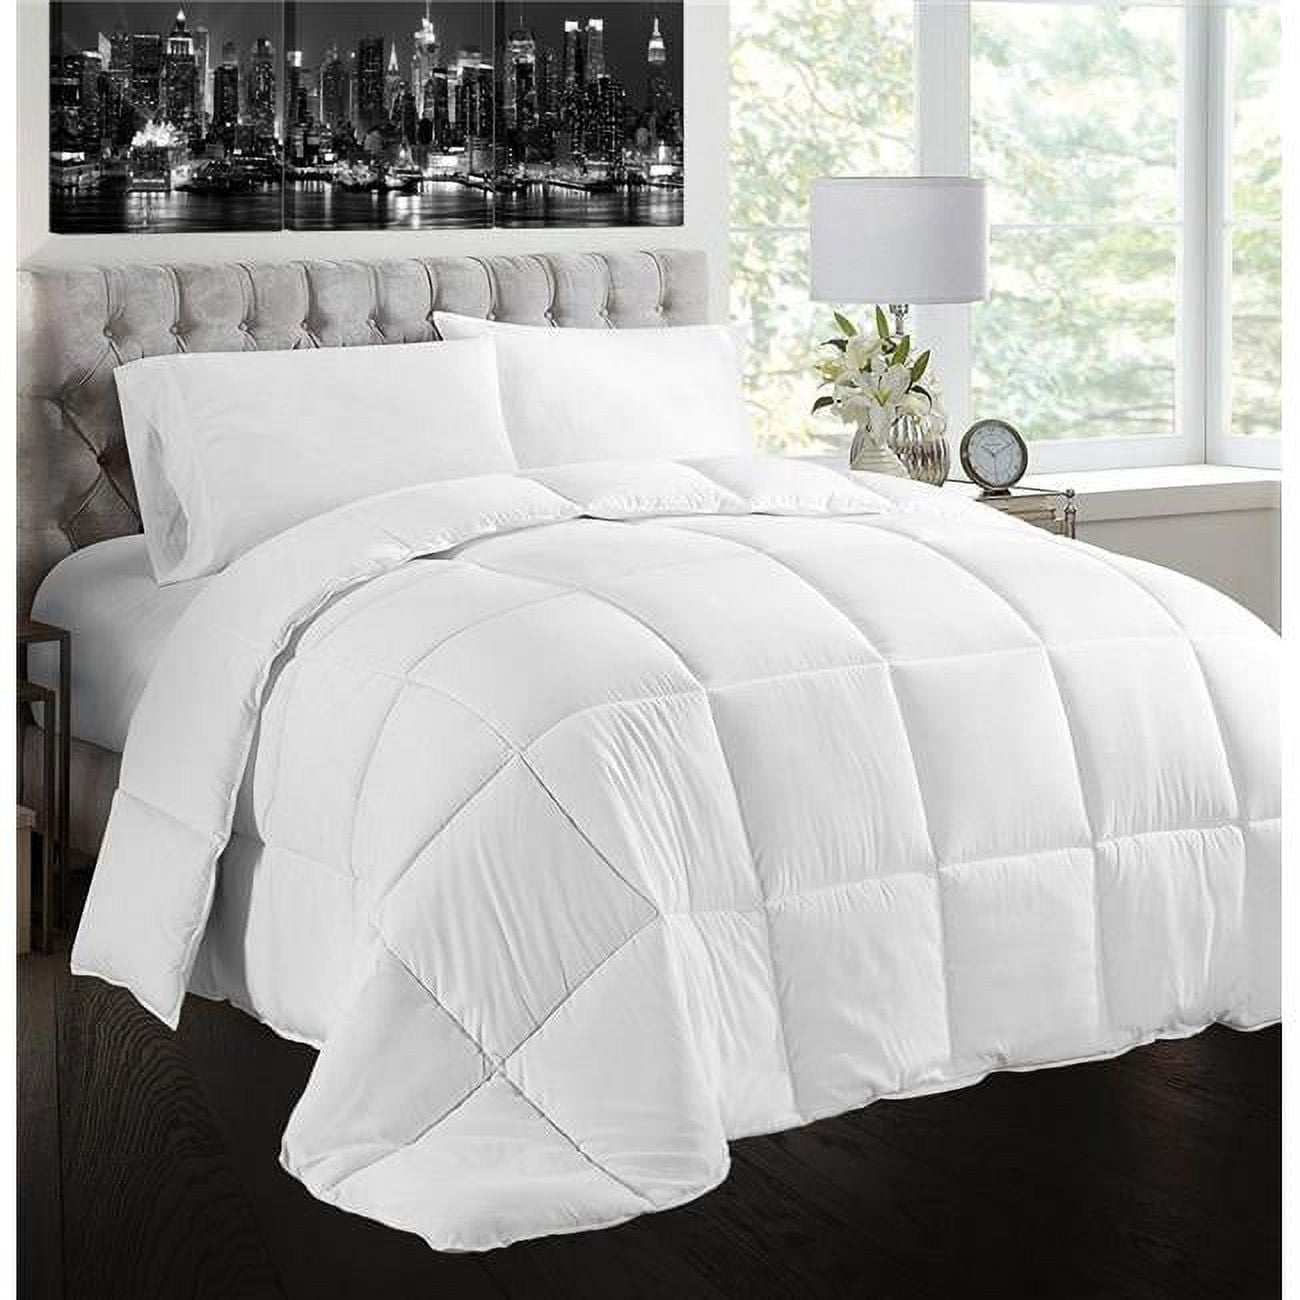 Cls-fc-kg 104 X 86 In. Natural Goose Feather & Down 100 Percent Cotton Case King Size Comforter Set, White